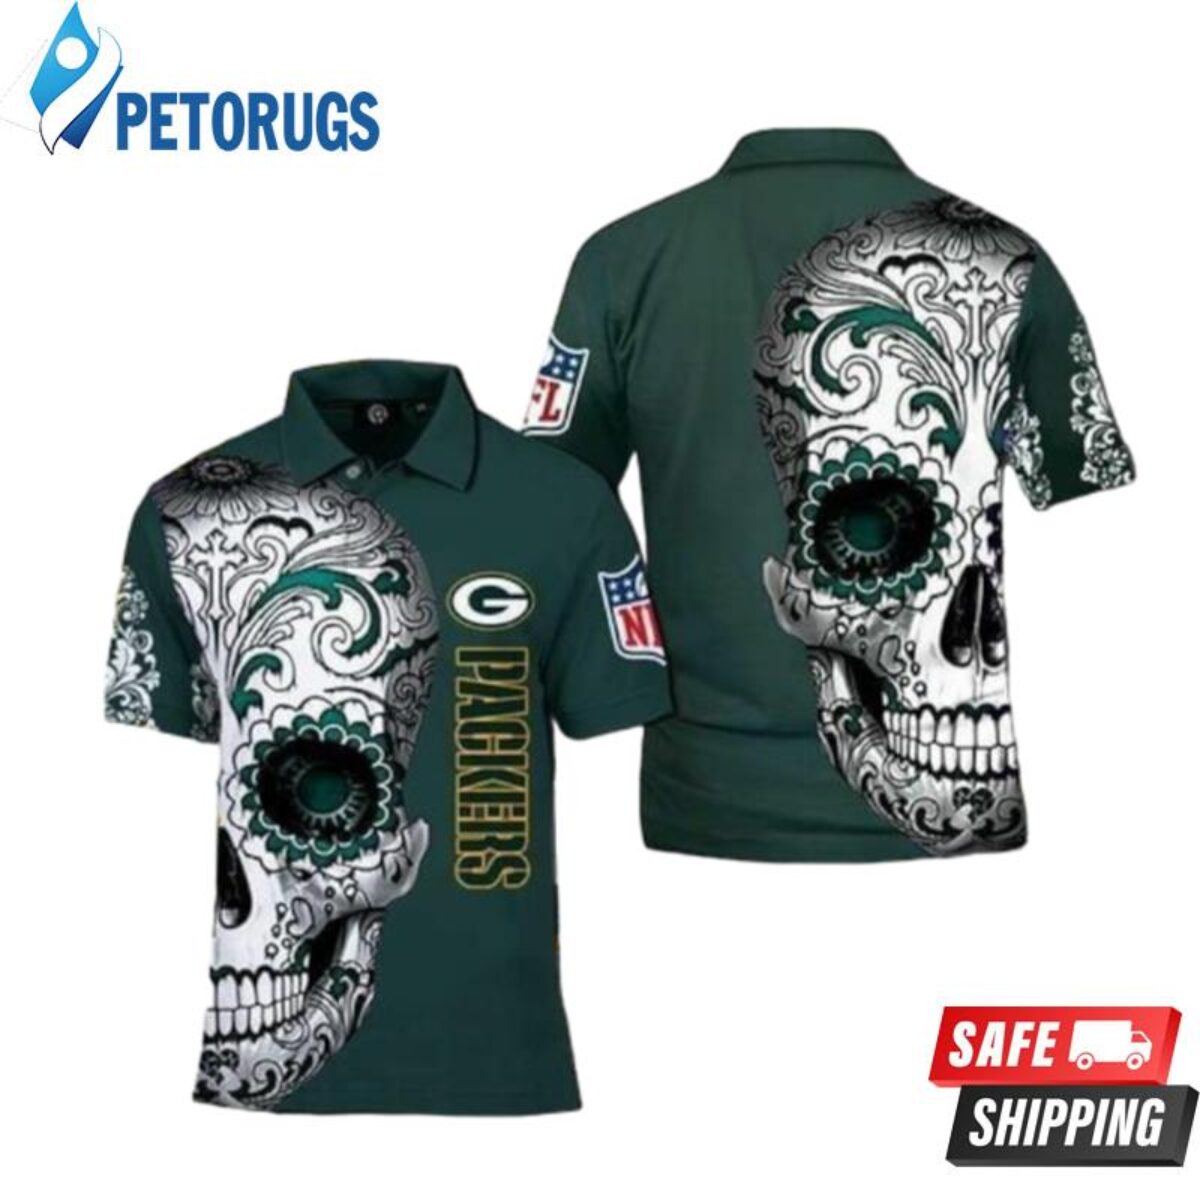 Green Bay Packers Logo Nfc North Champions Super Bowl 2021 Personalized  Polo Shirts - Peto Rugs